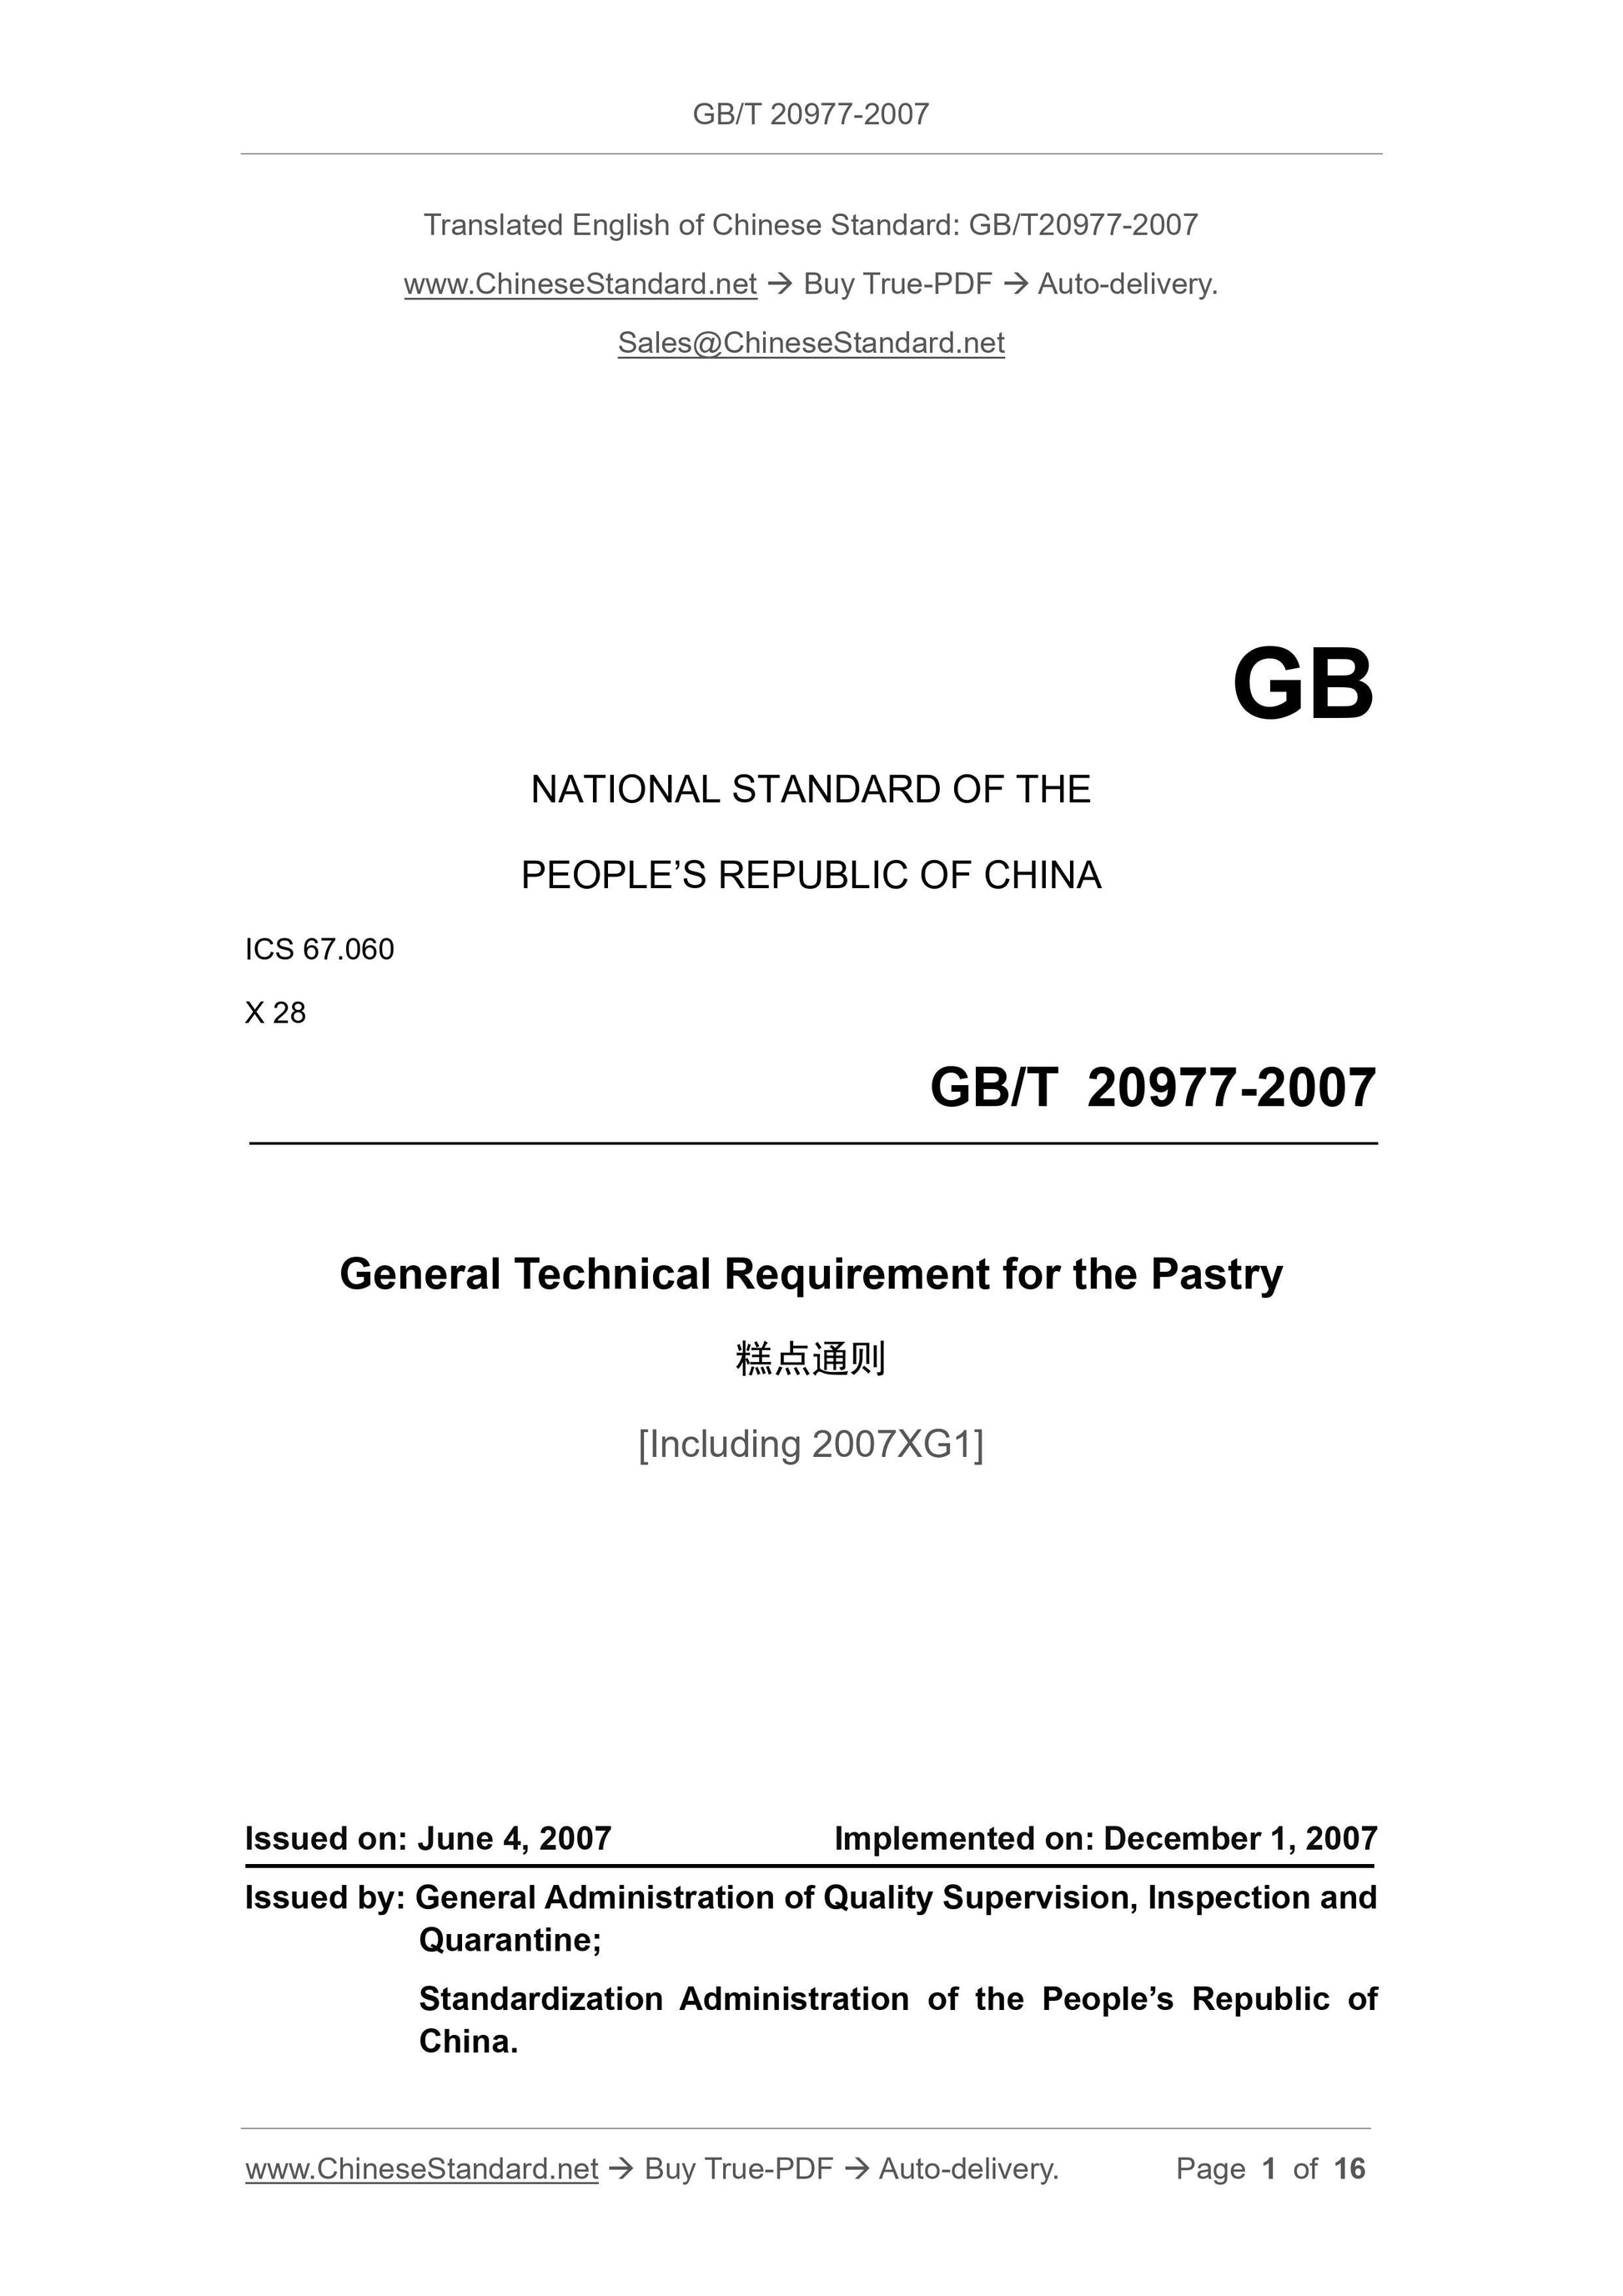 GB/T 20977-2007 Page 1